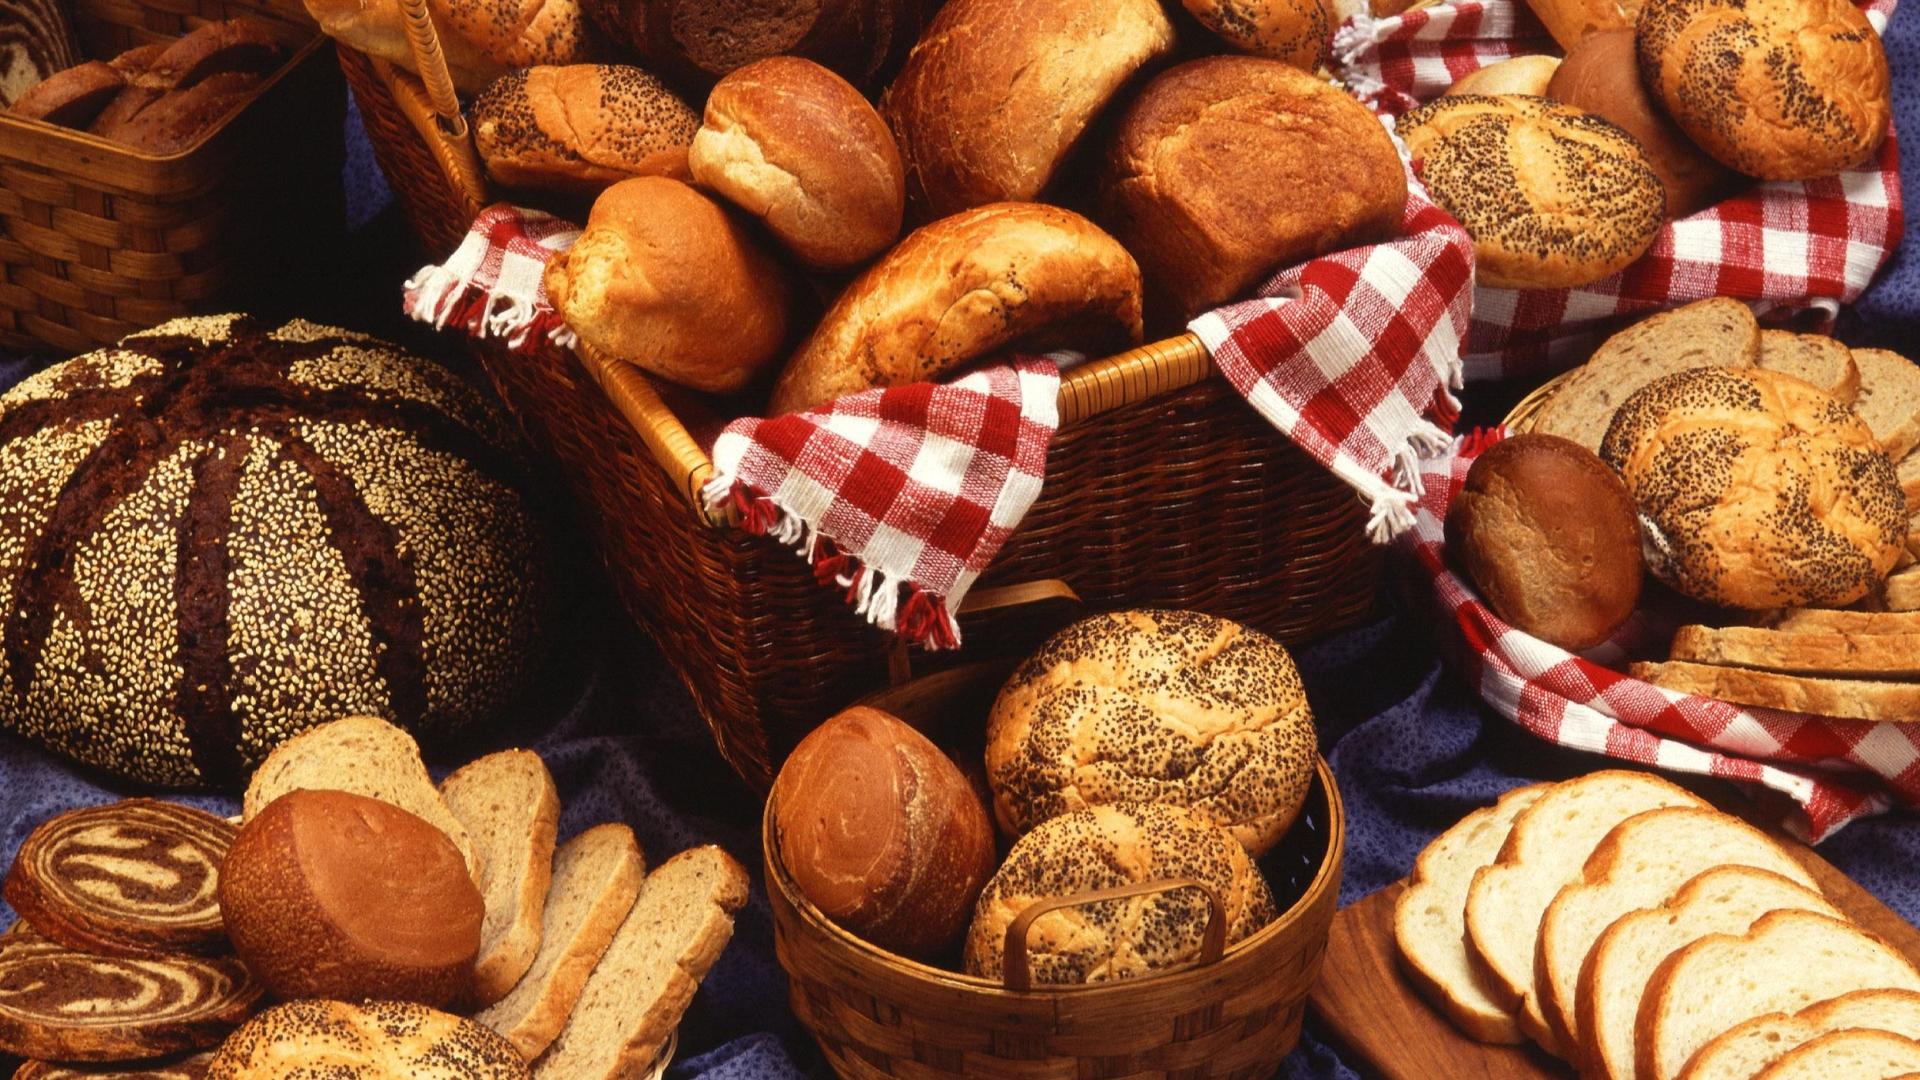 different types of bread at a bakery shop